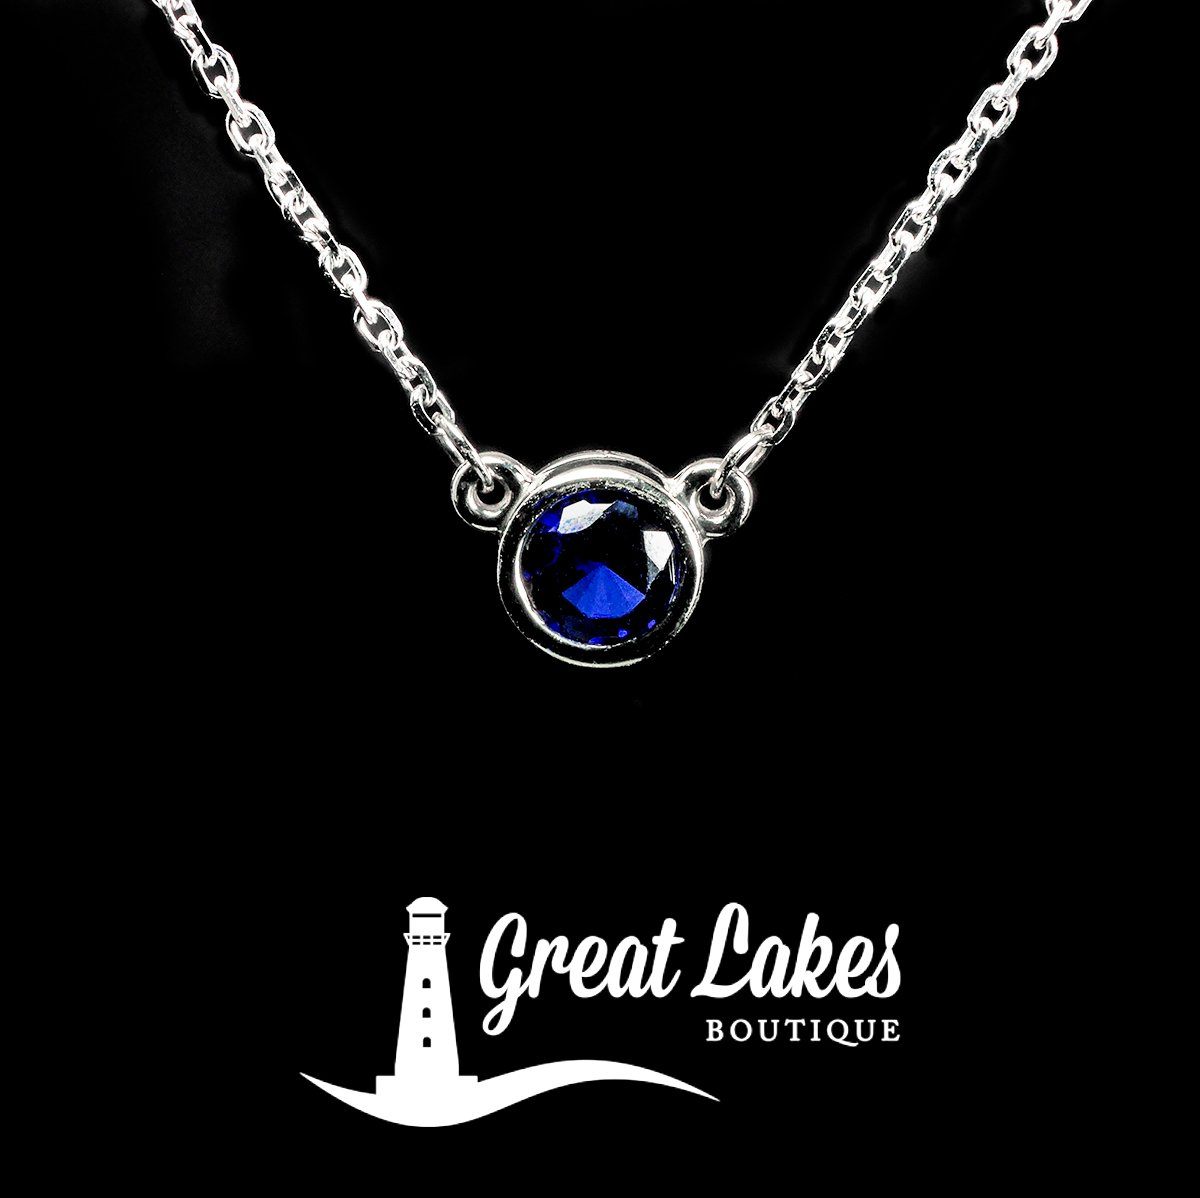 Great Lakes Boutique White Gold & Sapphire Necklace